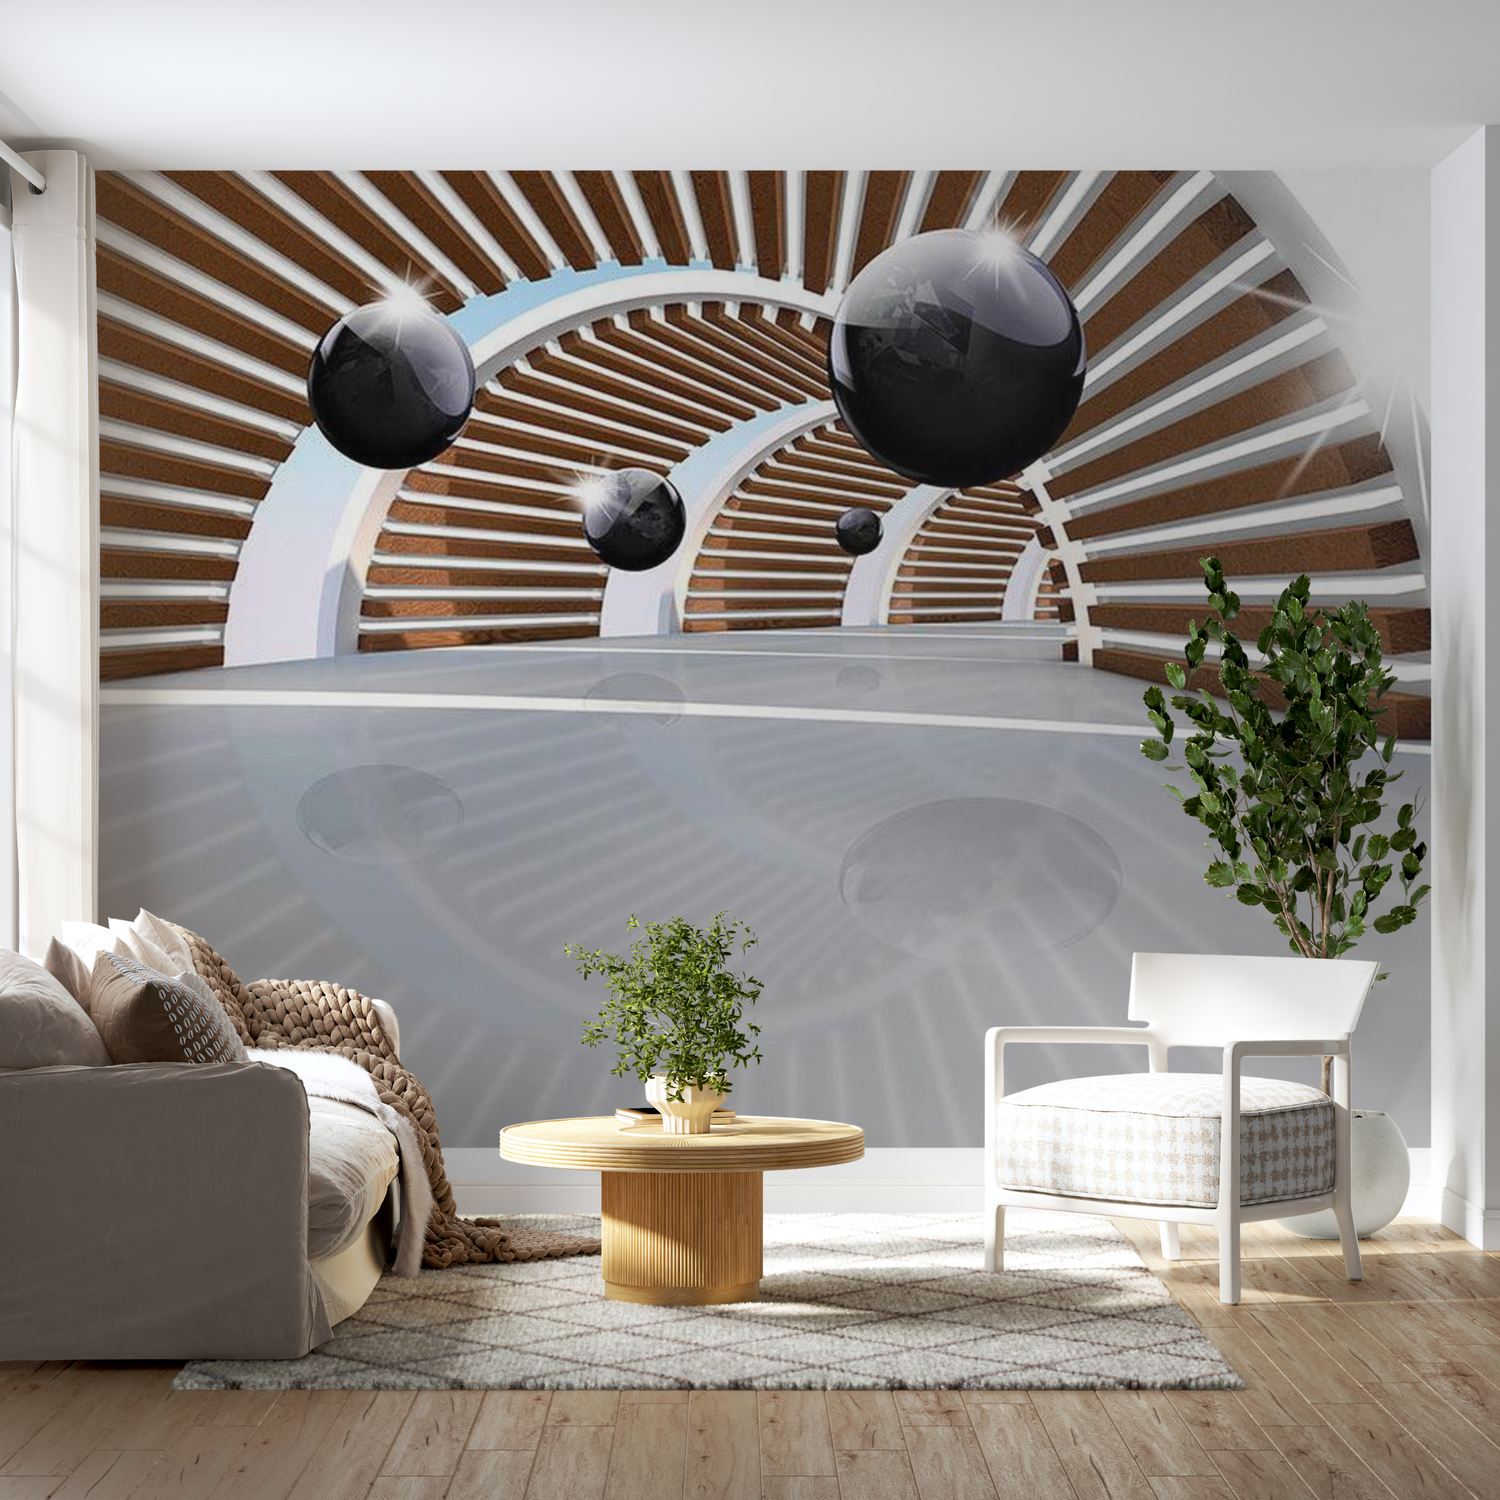 3D Illusion Wallpaper Wall Mural - Sky Tunnel 39"Wx27"H